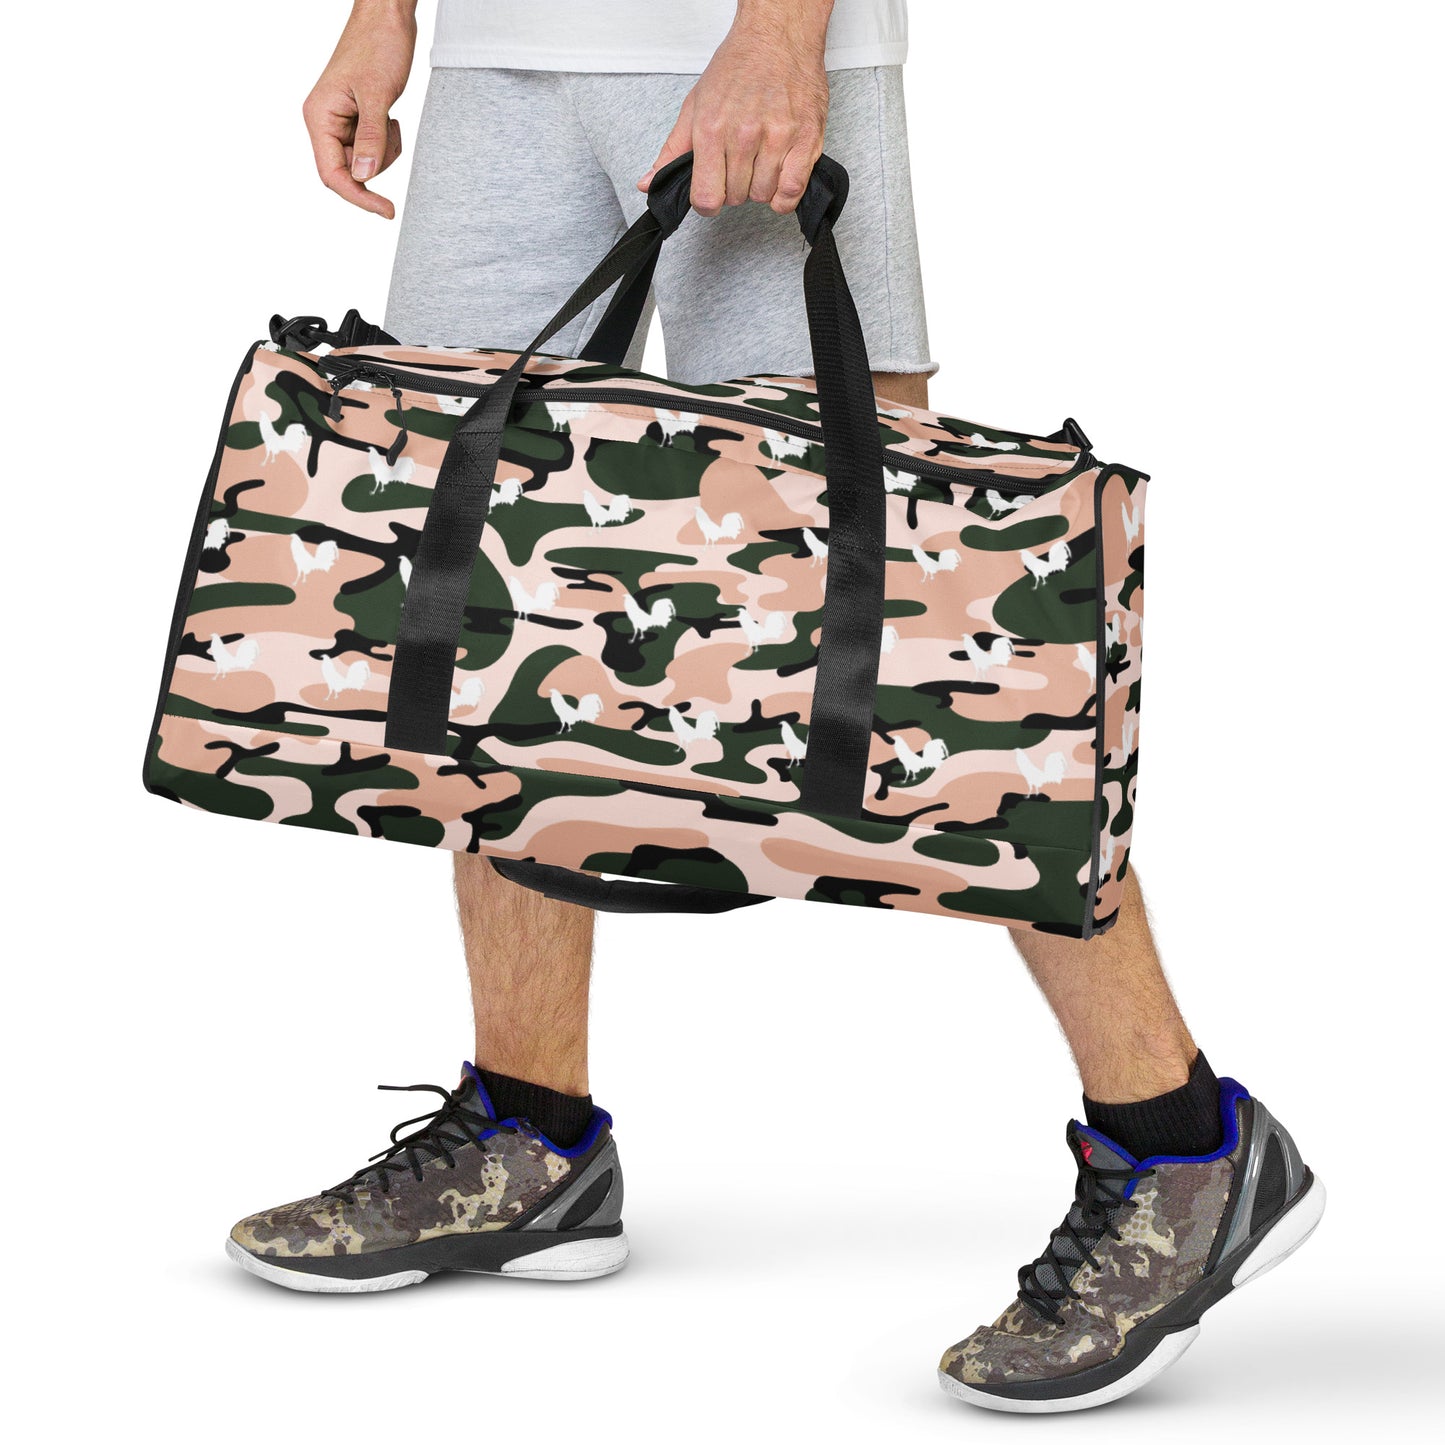 White Cock Pink Grey Camo Gamefowl Rooster Duffle Bag